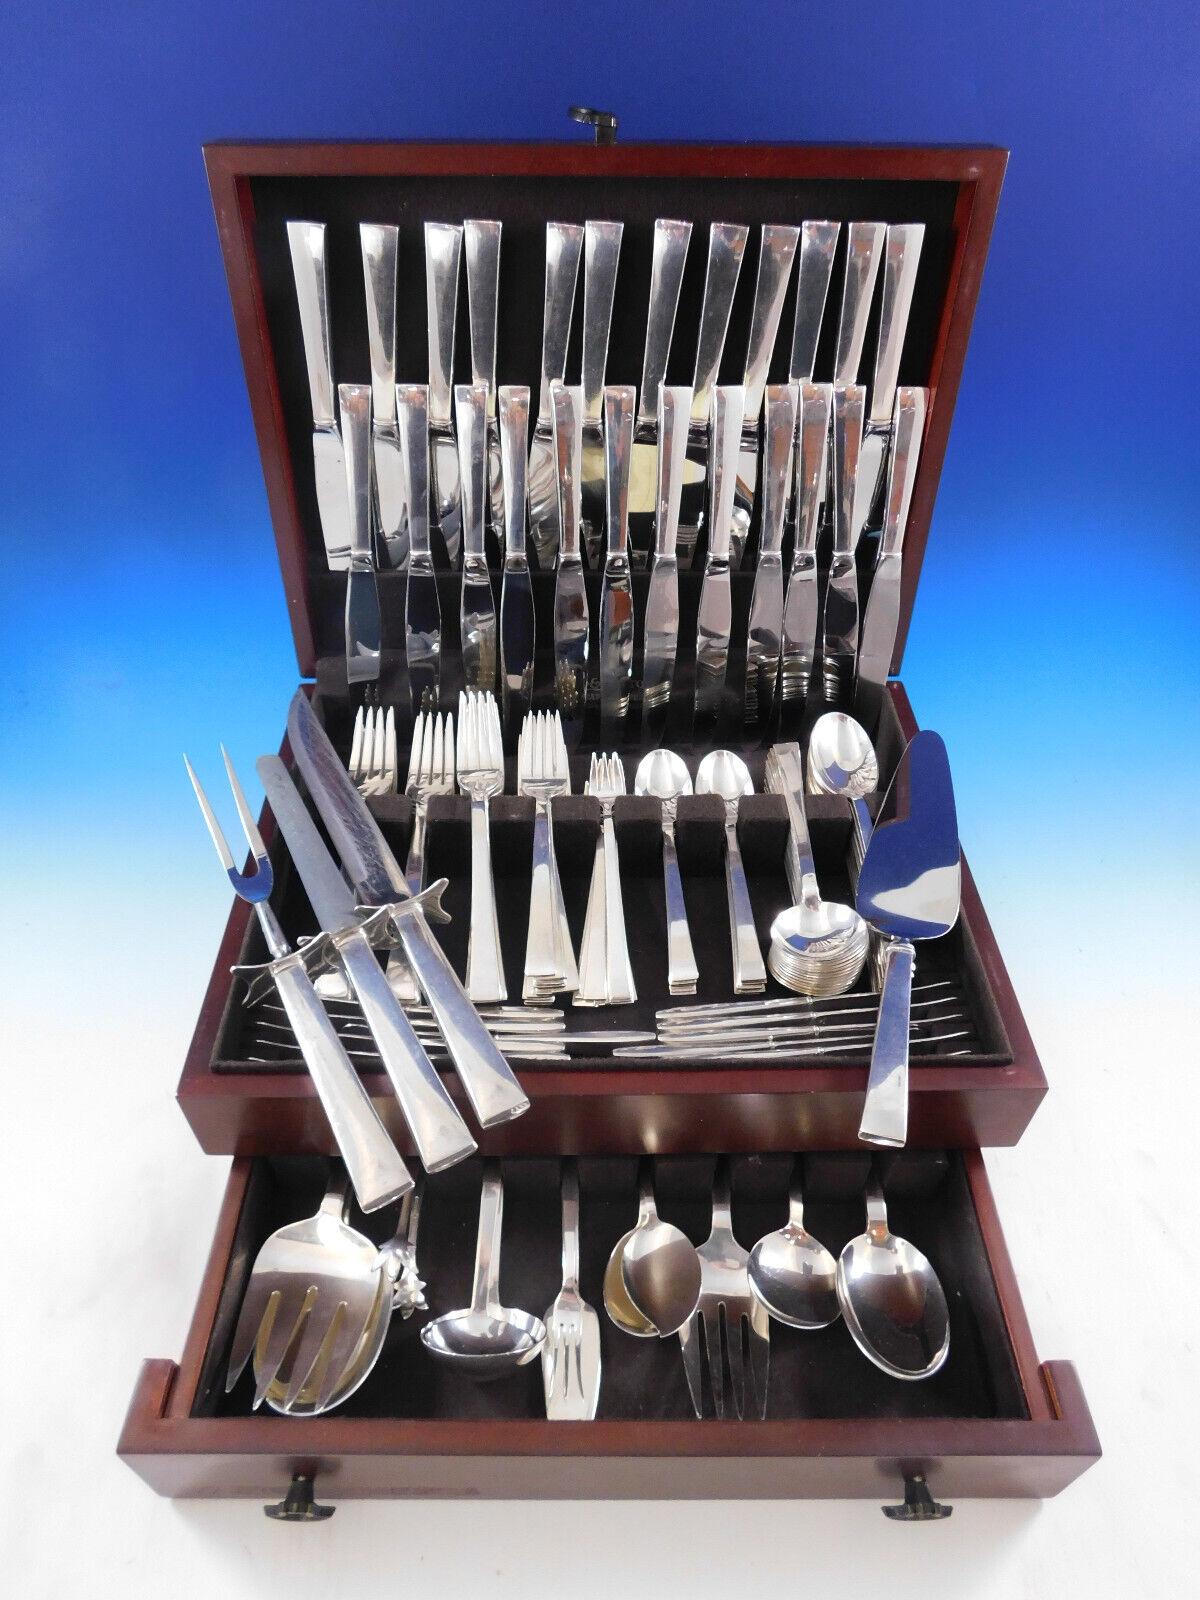 Continental is the perfect pattern choice for those who are looking for a highly polished, clean, contemporary look.

Monumental Continental by International Dinner and Luncheon Size Sterling Silver flatware set - 137 pieces. This set